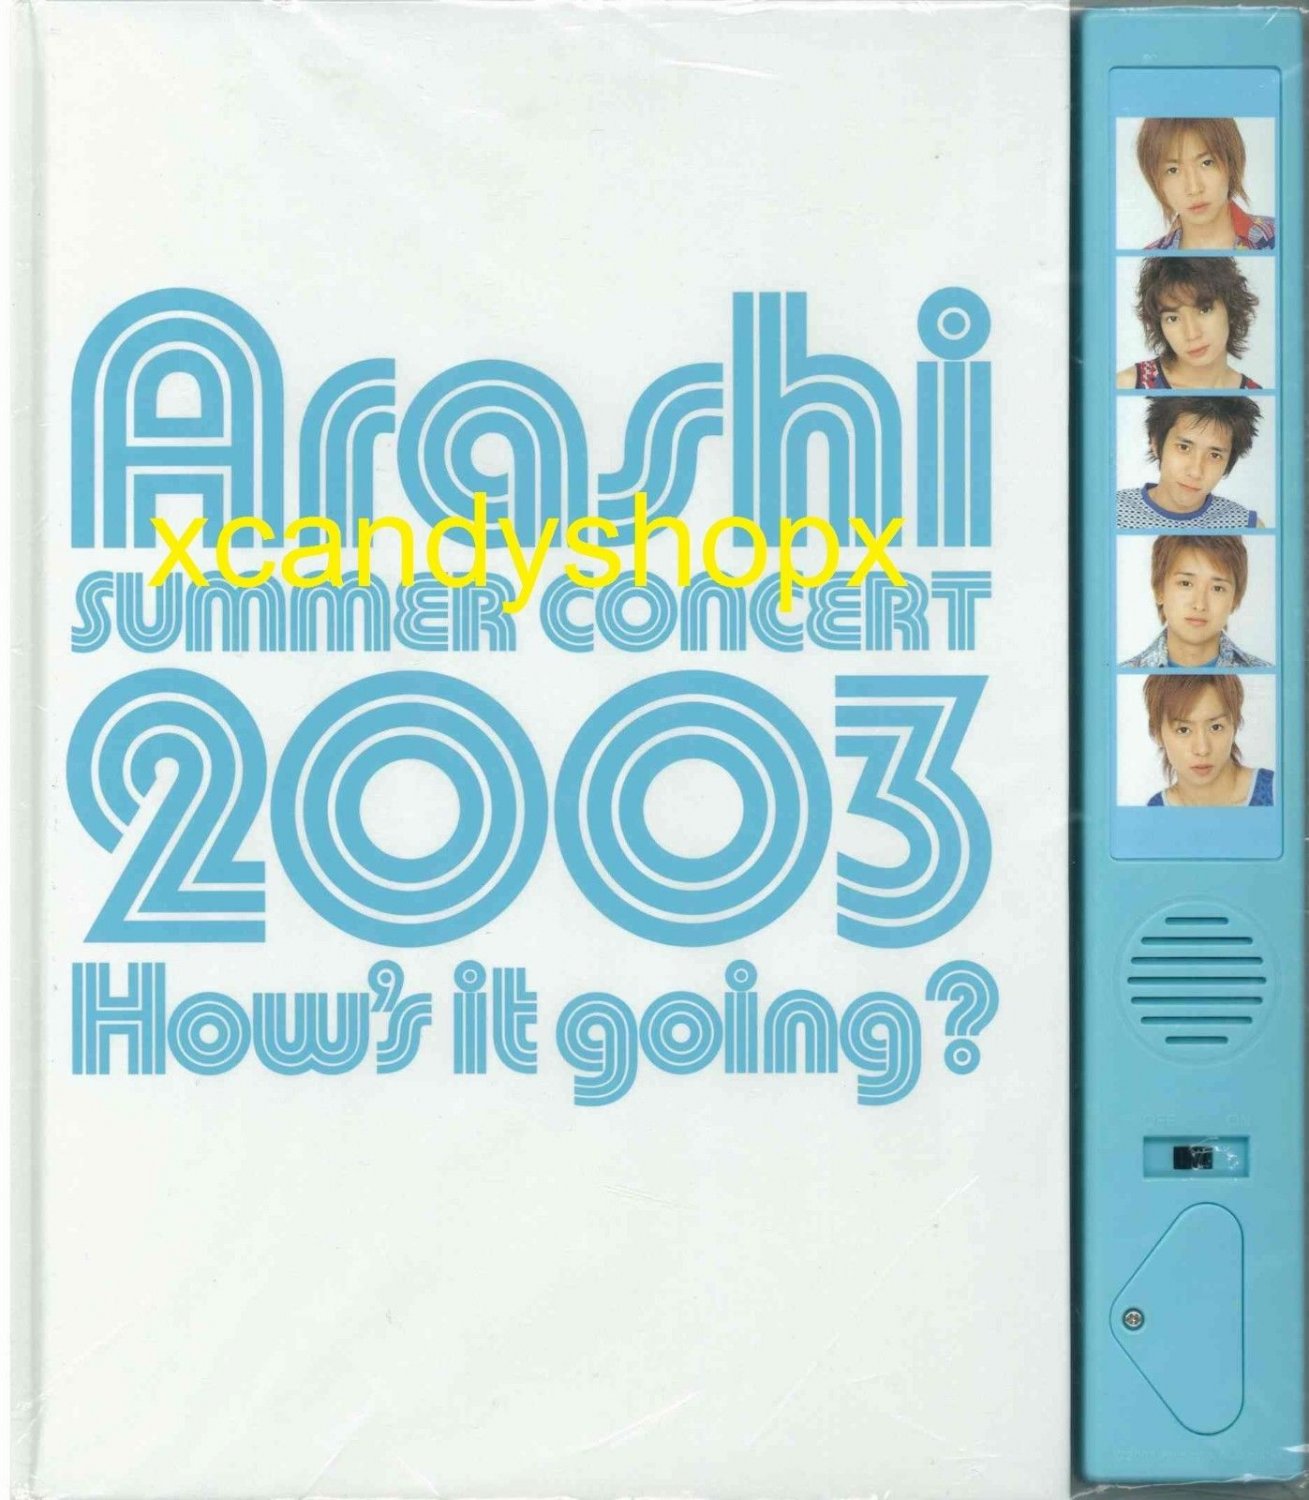 ARASHI 2003 How's it going? Japan official pamphlet with members' voices